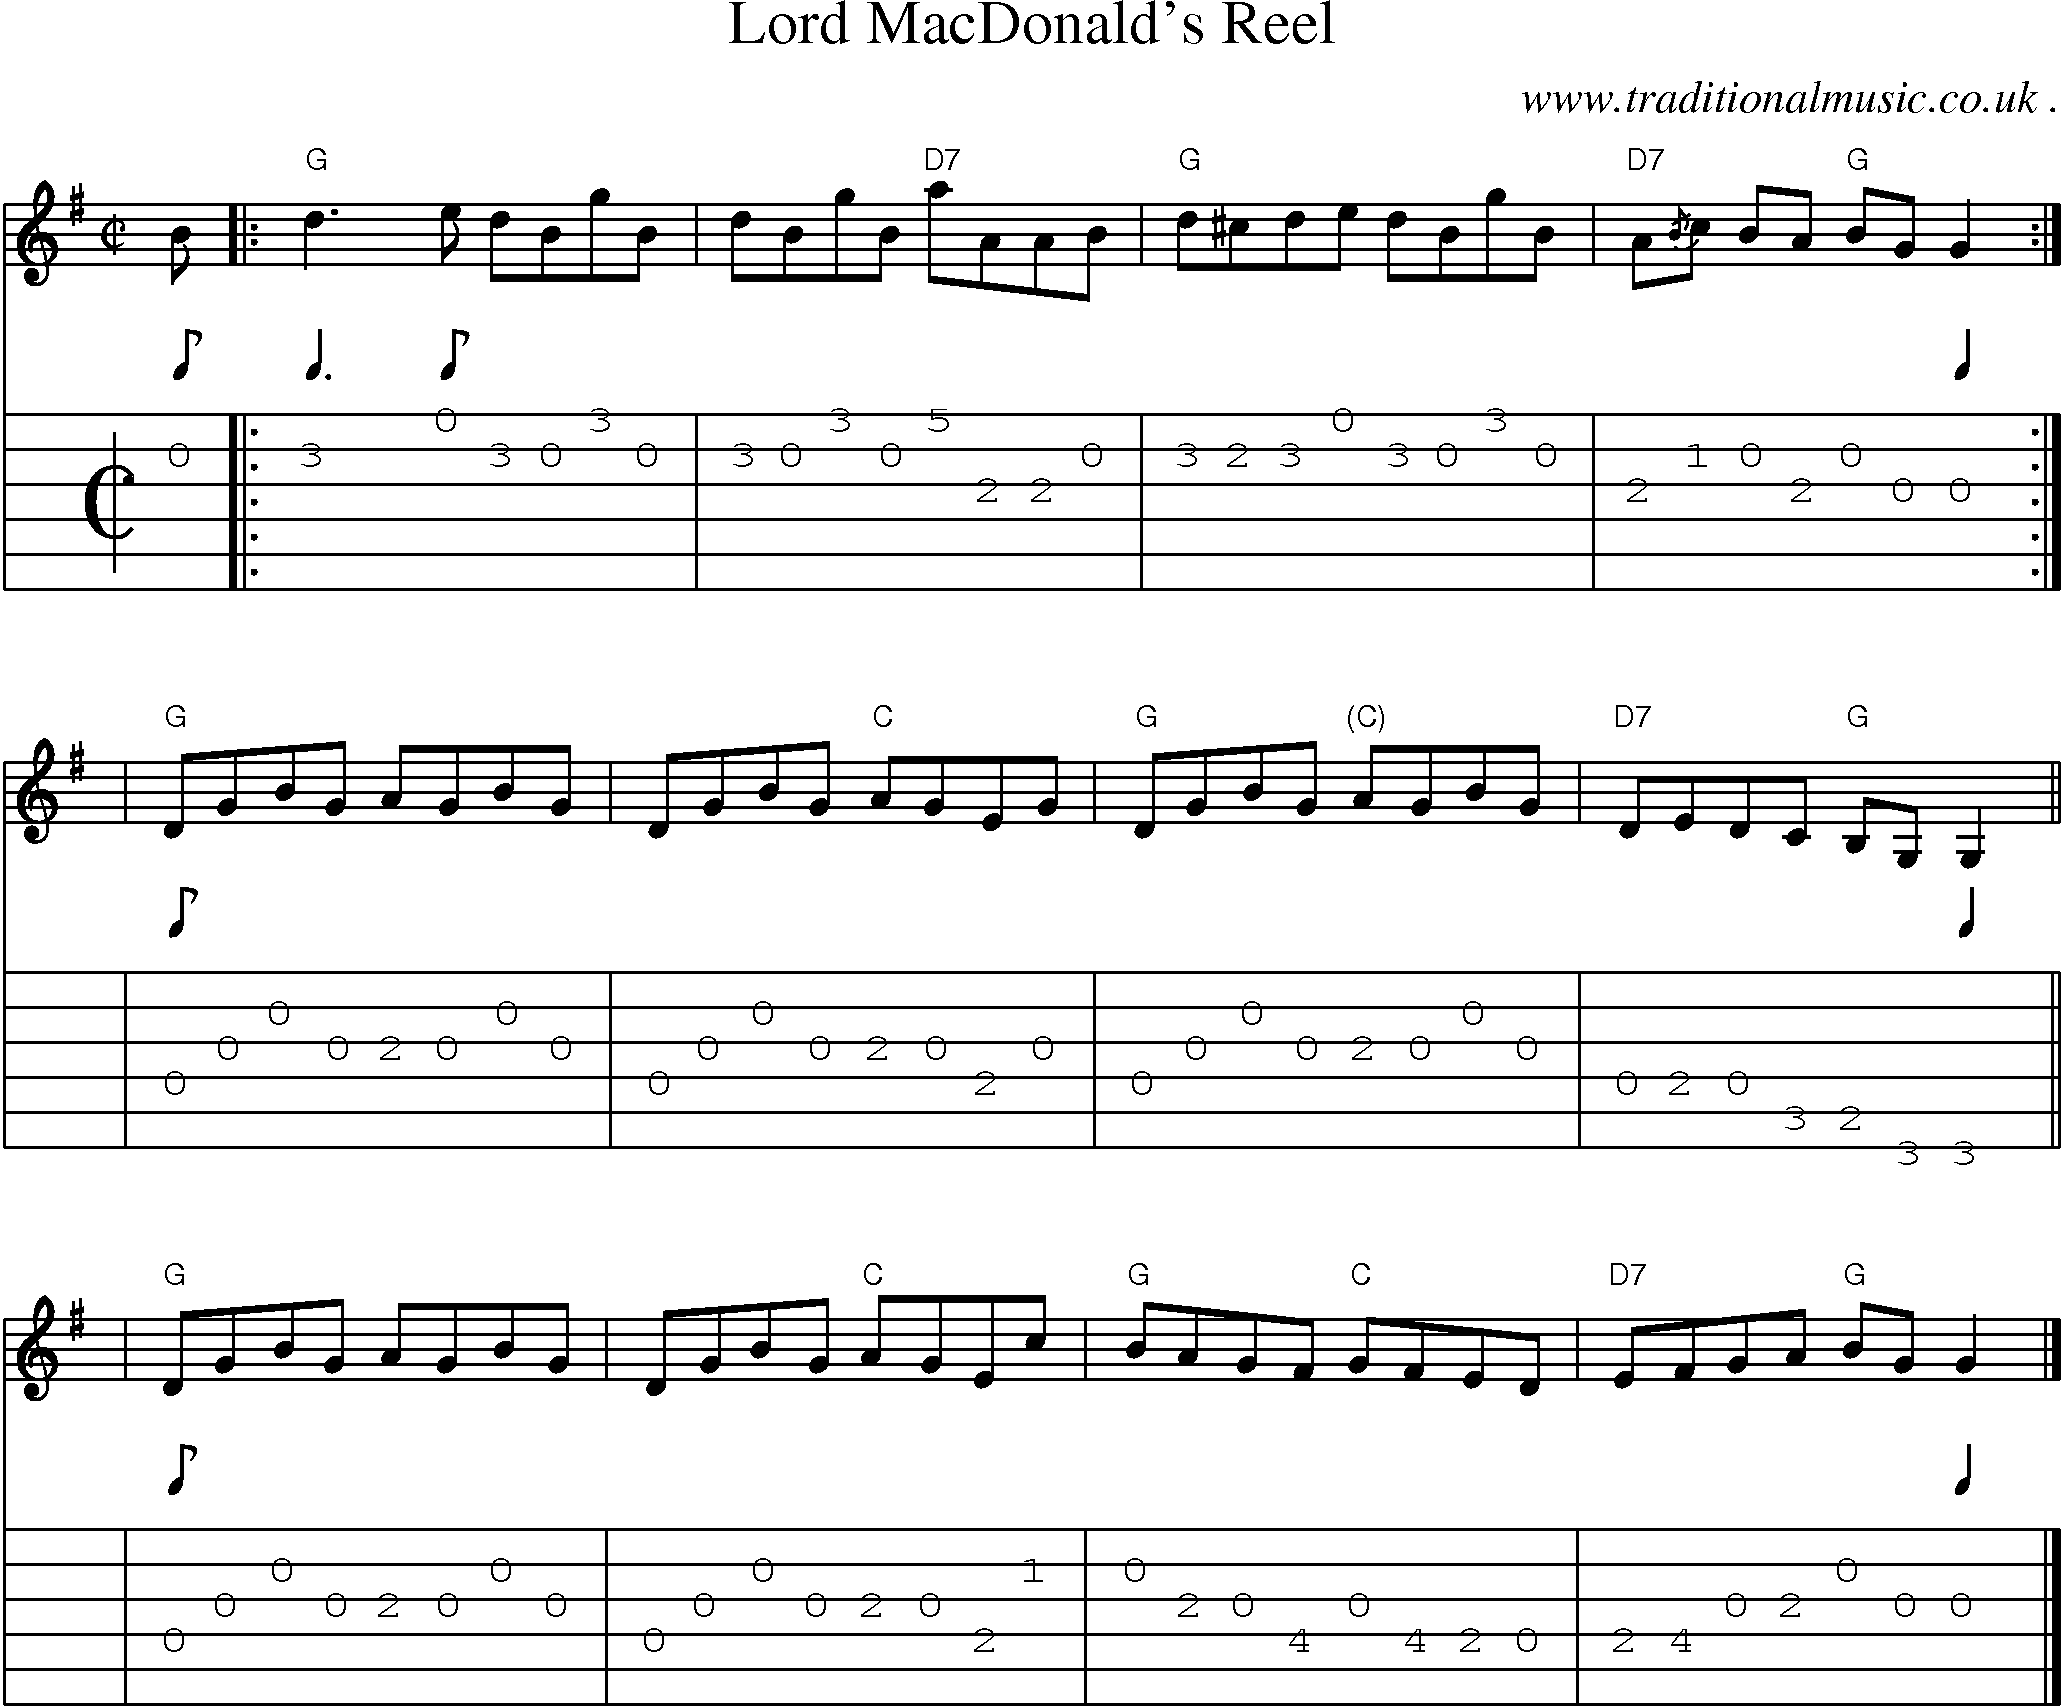 Sheet-music  score, Chords and Guitar Tabs for Lord Macdonalds Reel